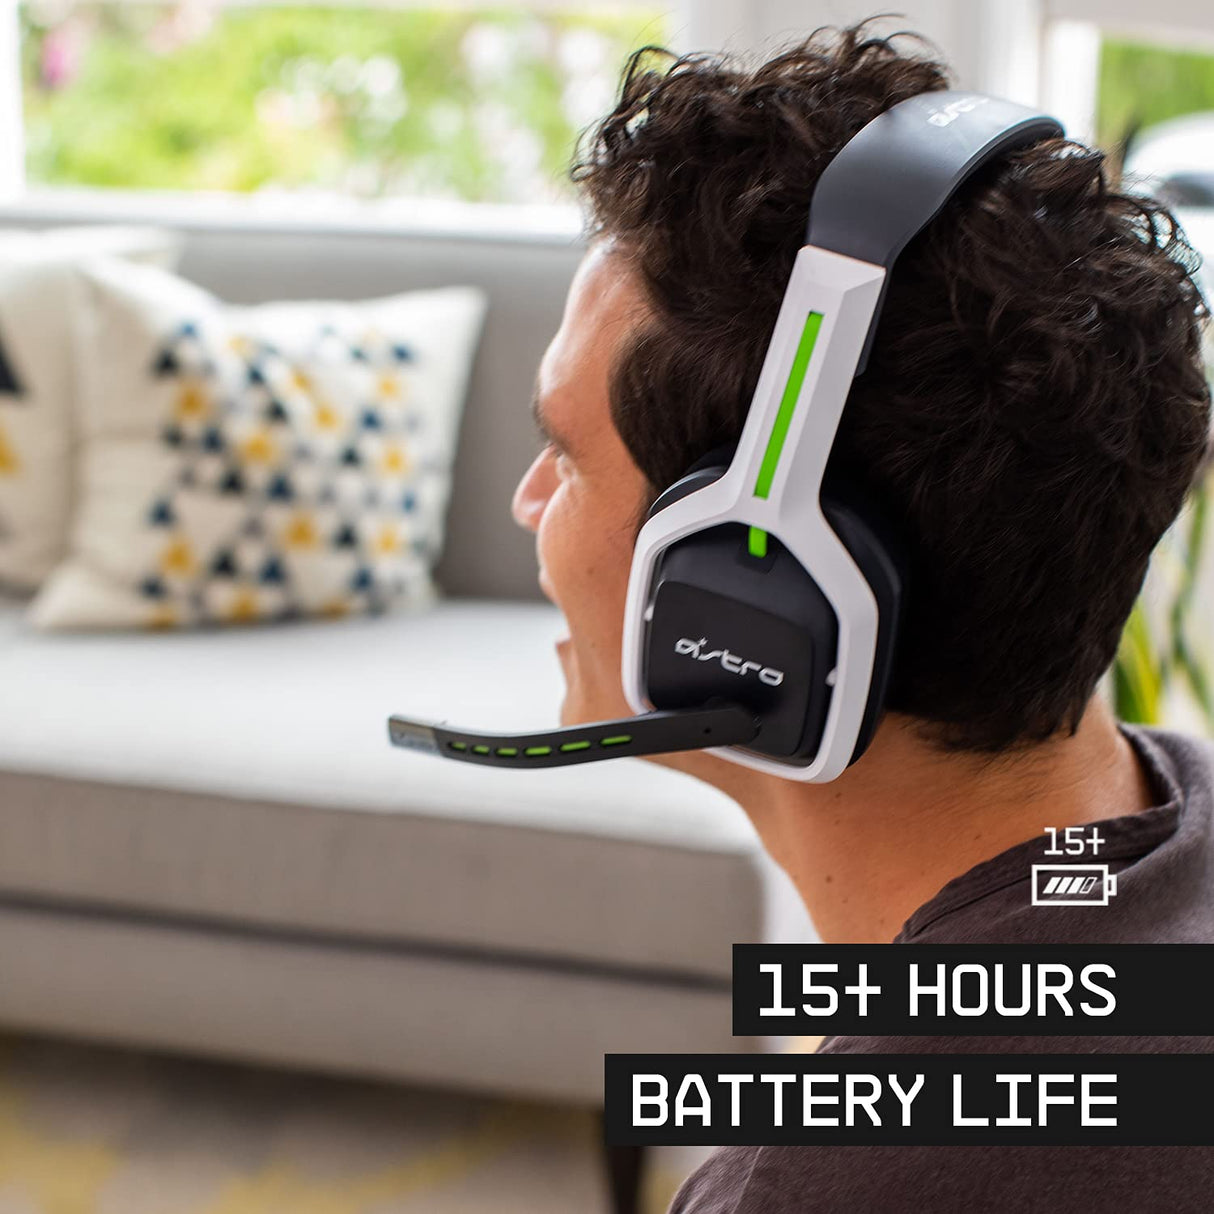 ASTRO Gaming A20 Wireless Headset Gen 2 for Xbox Series X | S, Xbox One, PC &amp; Mac - White /Green Xbox Series X/S, PC/Mac Headset Only